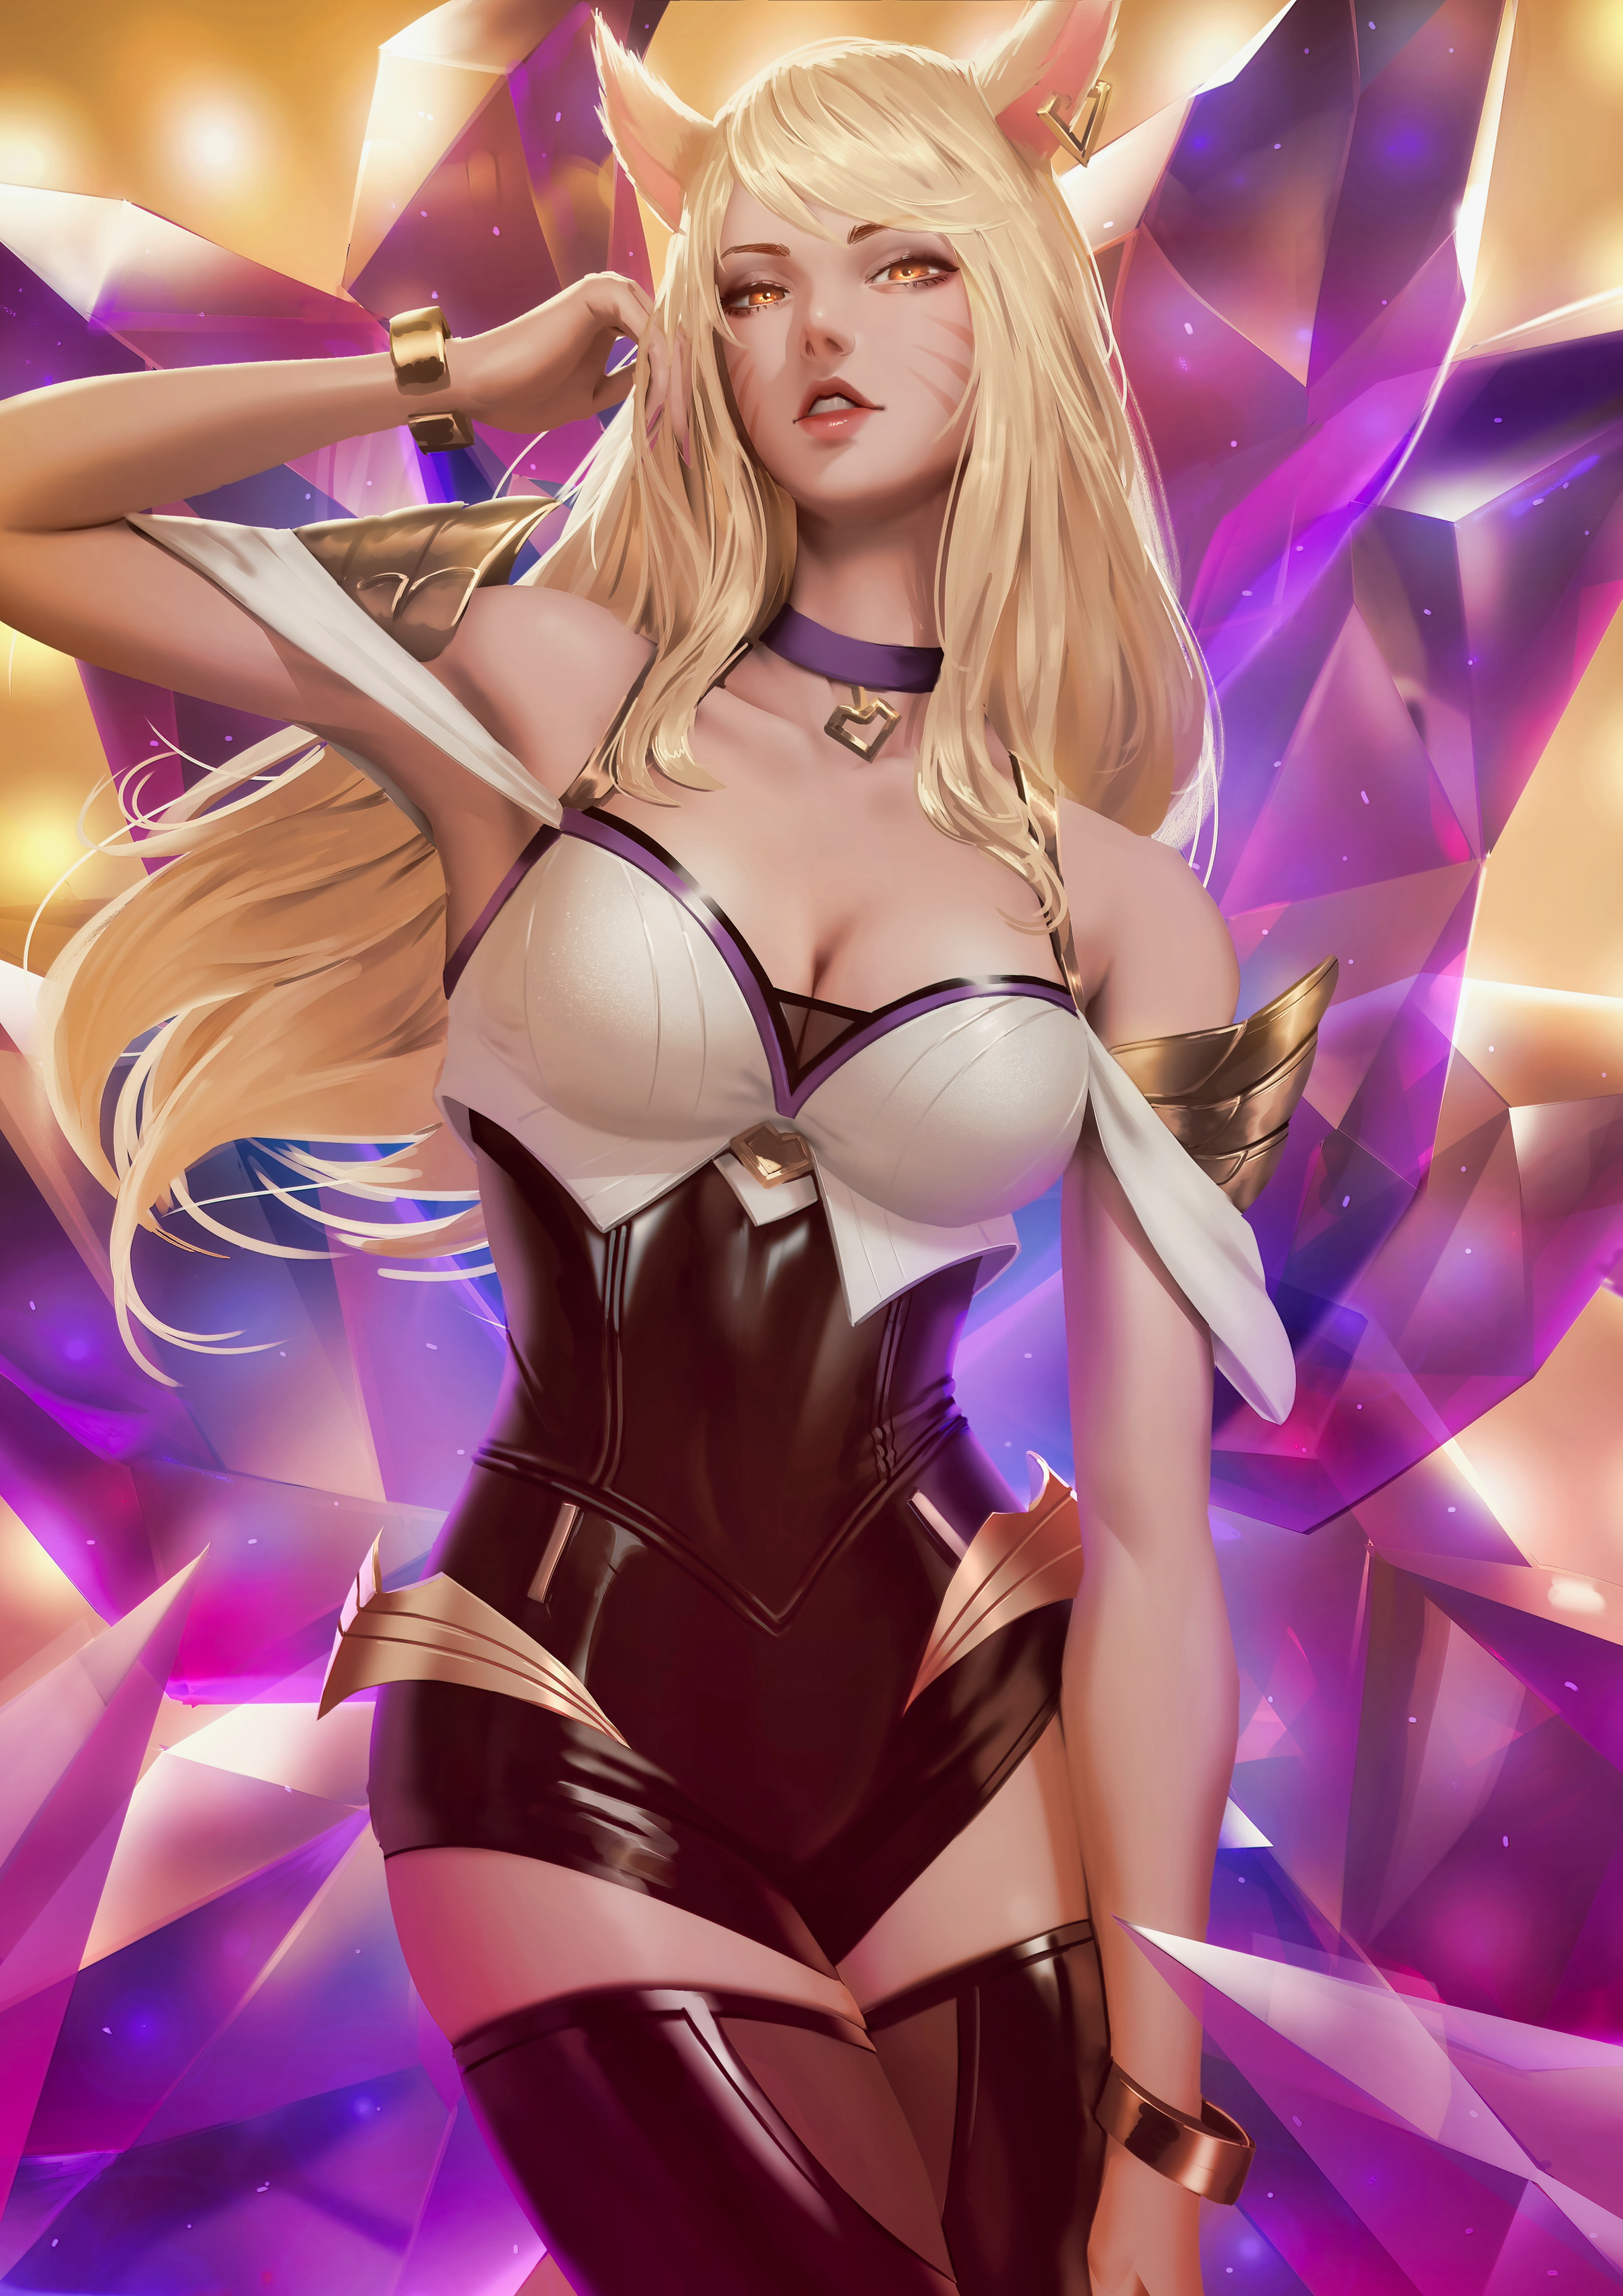 General 3111x4400 Sean Tay Ahri (League of Legends) KDA Ahri League of Legends League of Legends: Wild Rift Riot Games artwork women video game girls fantasy girl digital art video games Video Games Clothes fictional character fan art illustration PC gaming portrait display drawing animal ears bodysuit tail fox girl blonde video game characters fantasy art